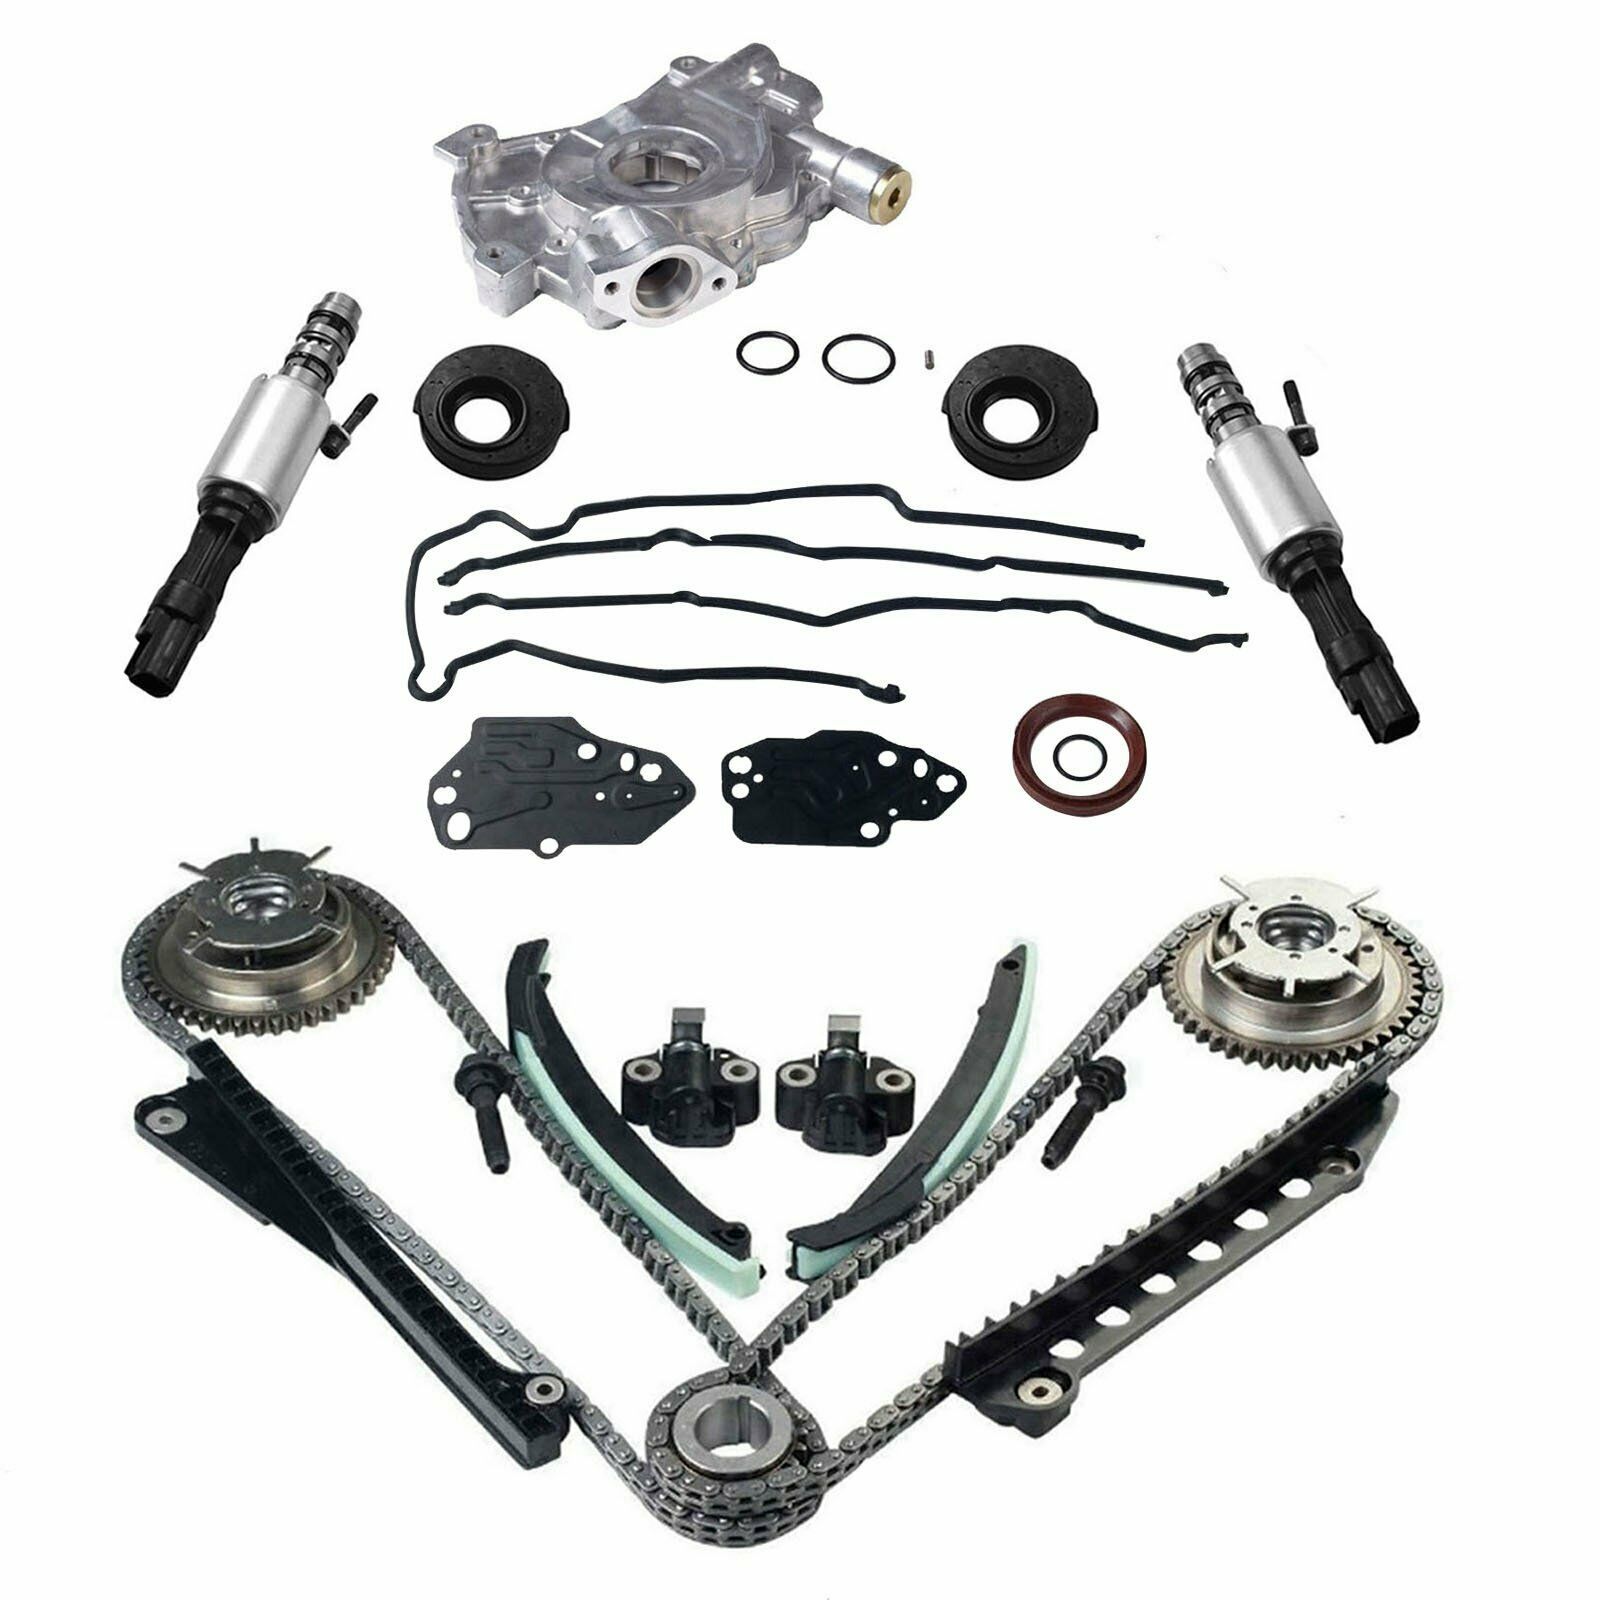 Timing Chain Oil Pump Kit+Cam Phaser+Gasket+Solenoid For 04-08 Ford Lincoln 5.4L